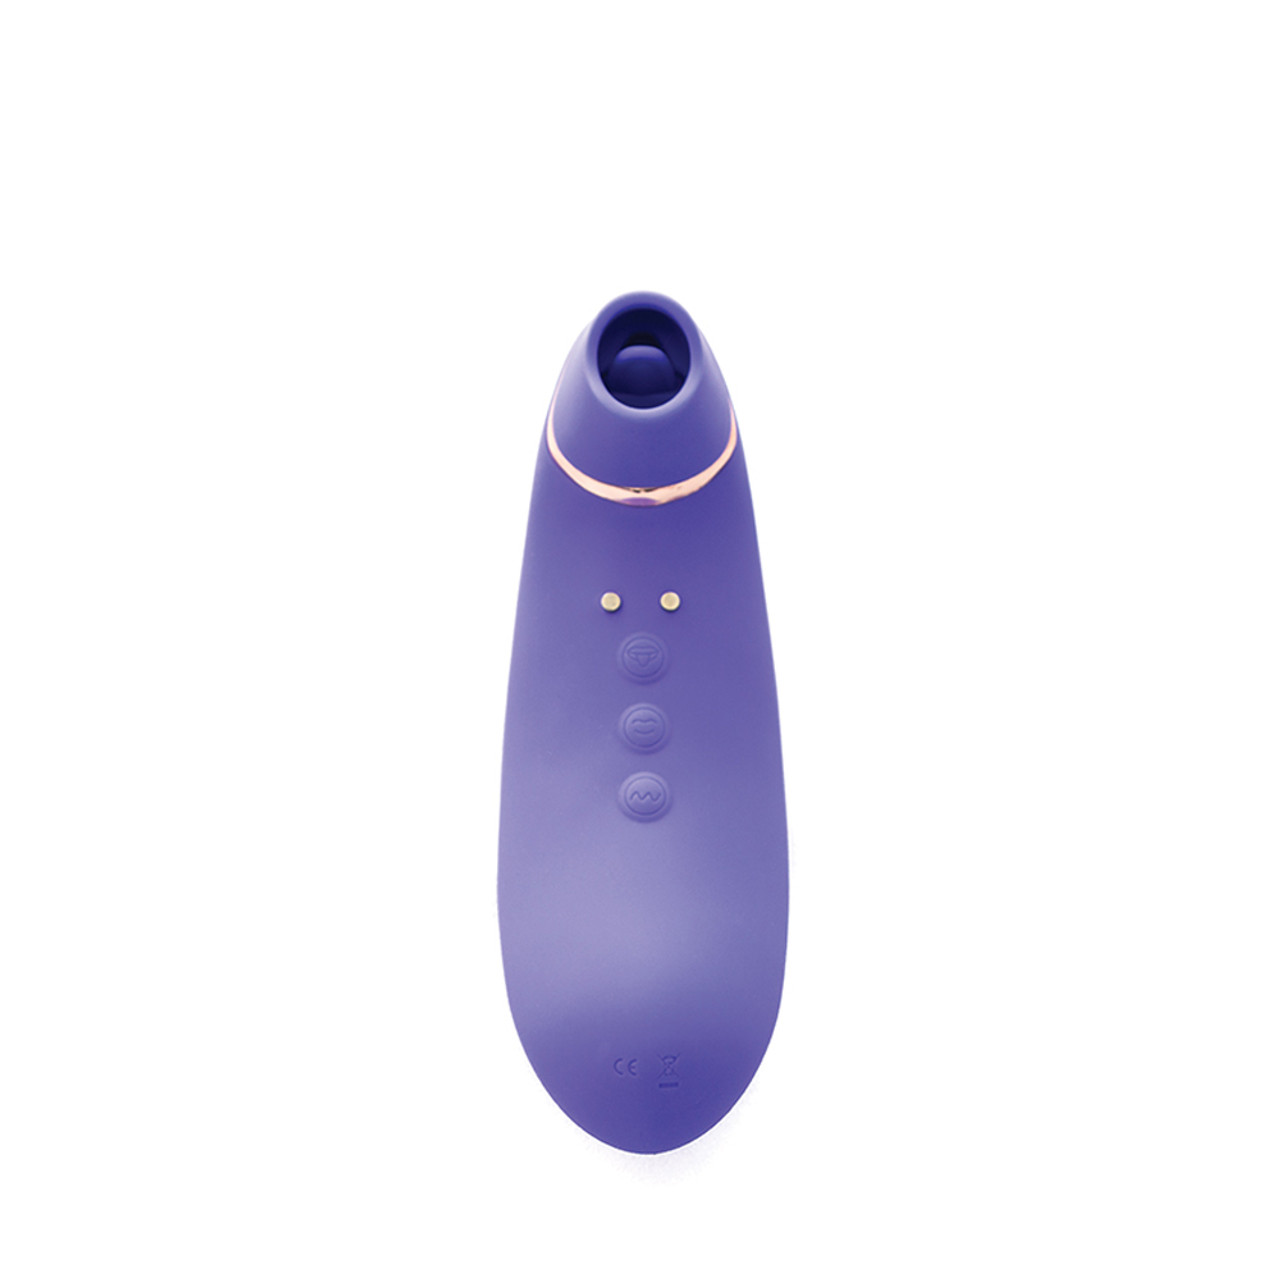 Buy The Trinitii 3 In 1 26 Function Rechargeable Flickering Tongue